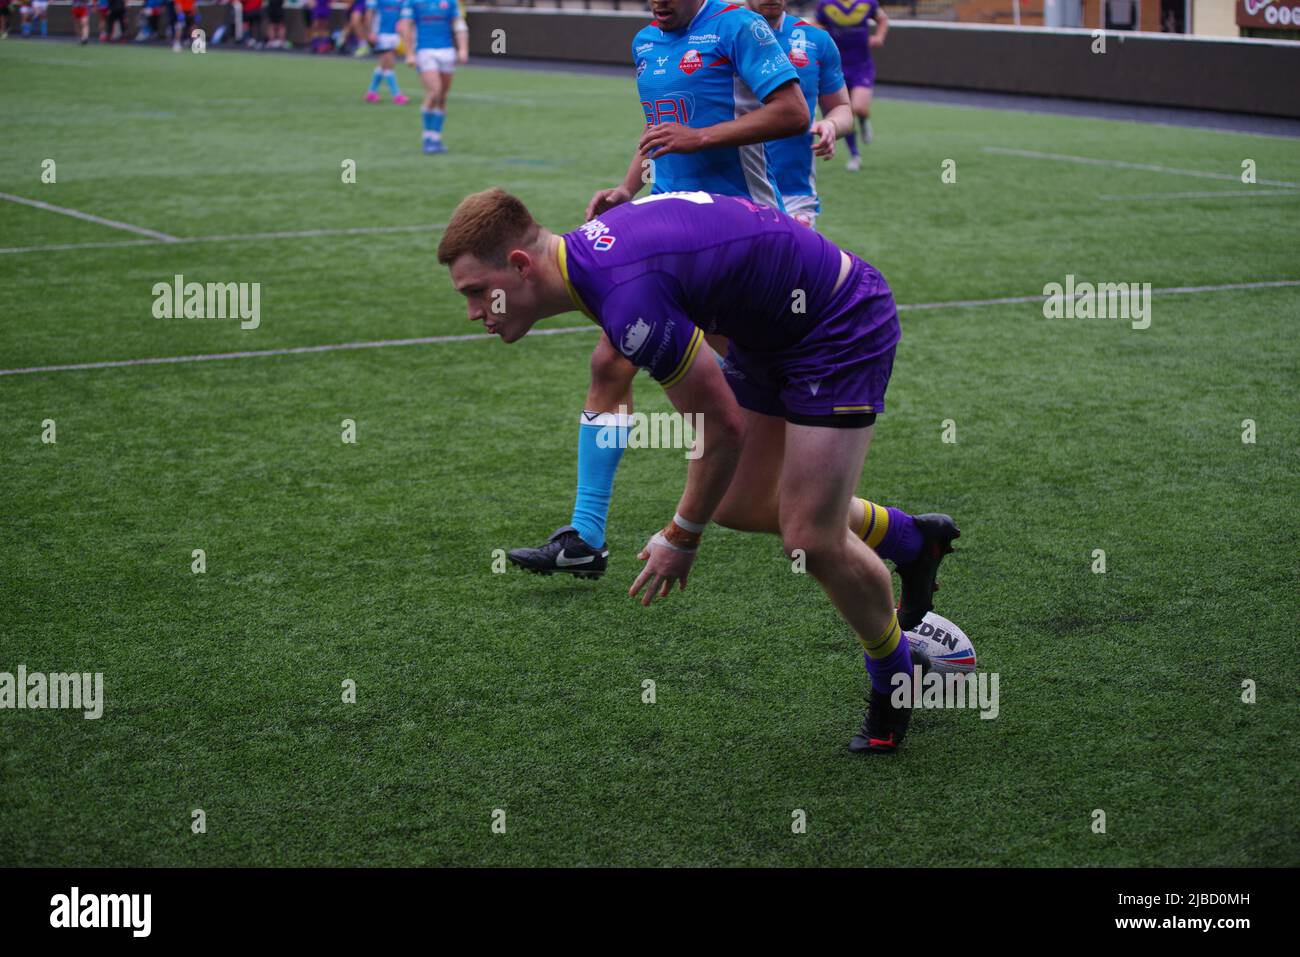 Newcastle, England, 5 June 2022. Sam Halsall scoring a try for Newcastle Thunder against Sheffield Eagles in the Betfred Championship at Kingston Park. Credit: Colin Edwards / Alamy Live News Stock Photo